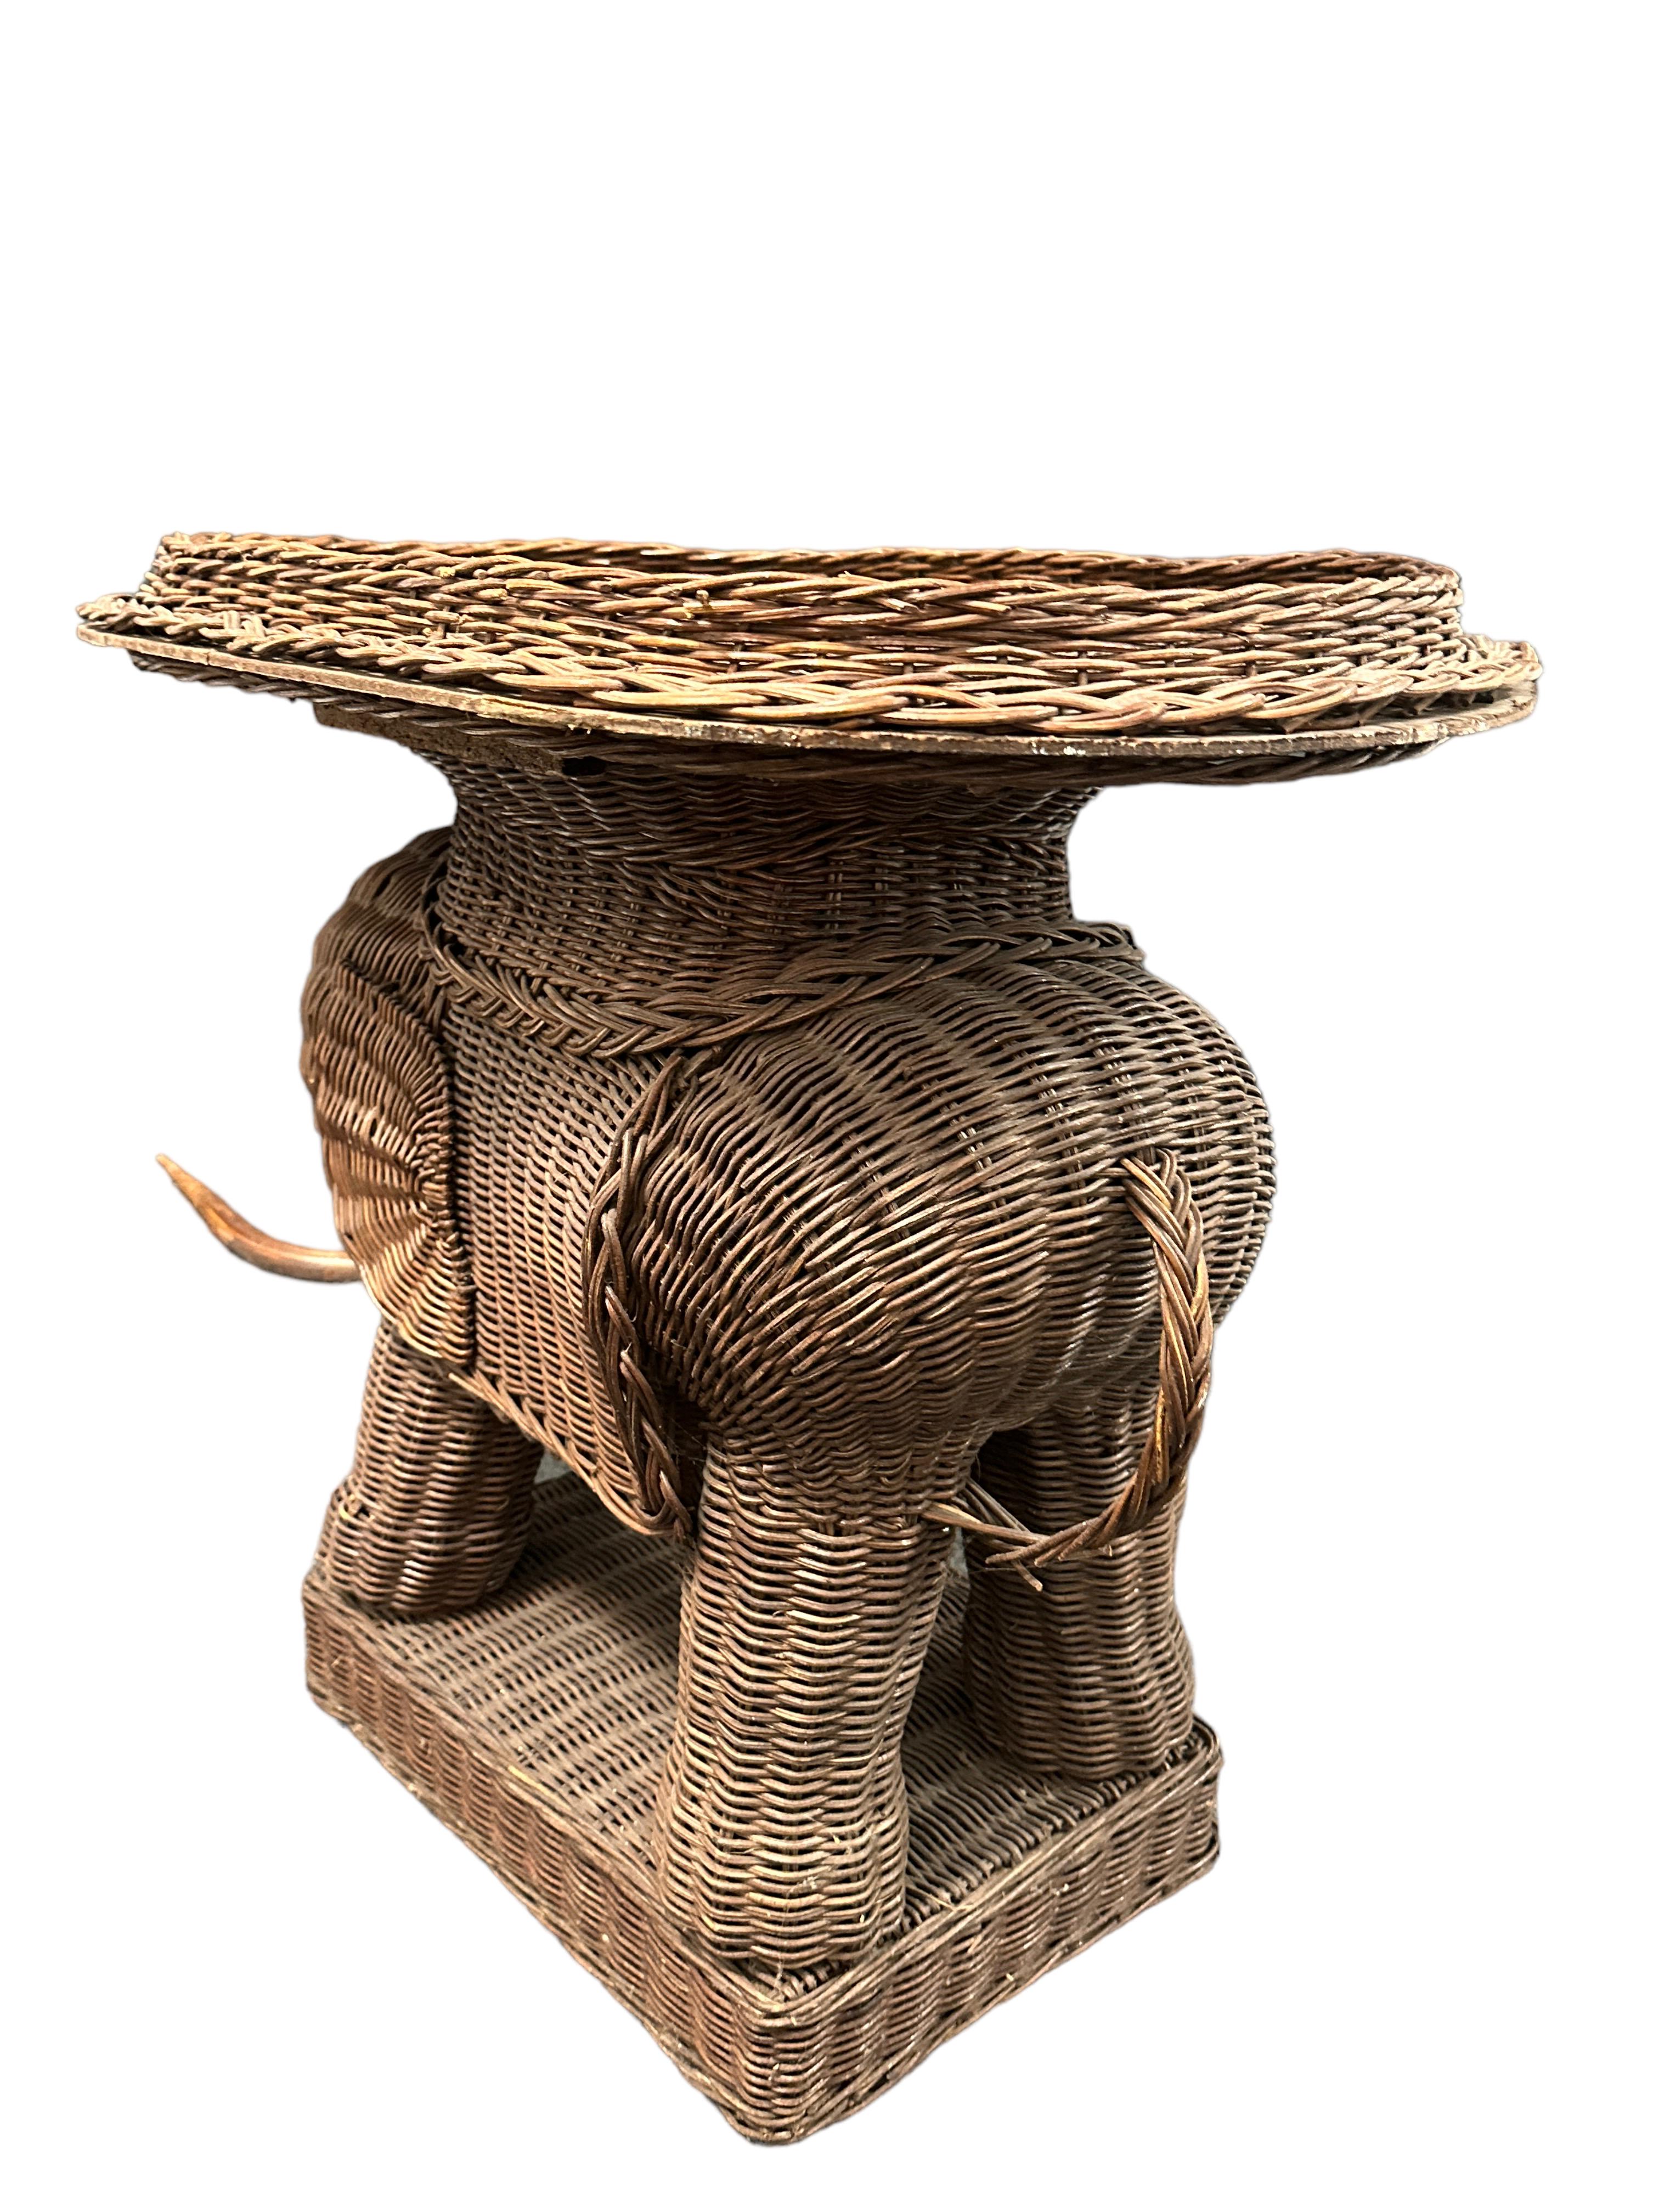 Stunning Rattan Wicker Elephant Side Table with Tray, France, 1960s In Good Condition For Sale In Nuernberg, DE